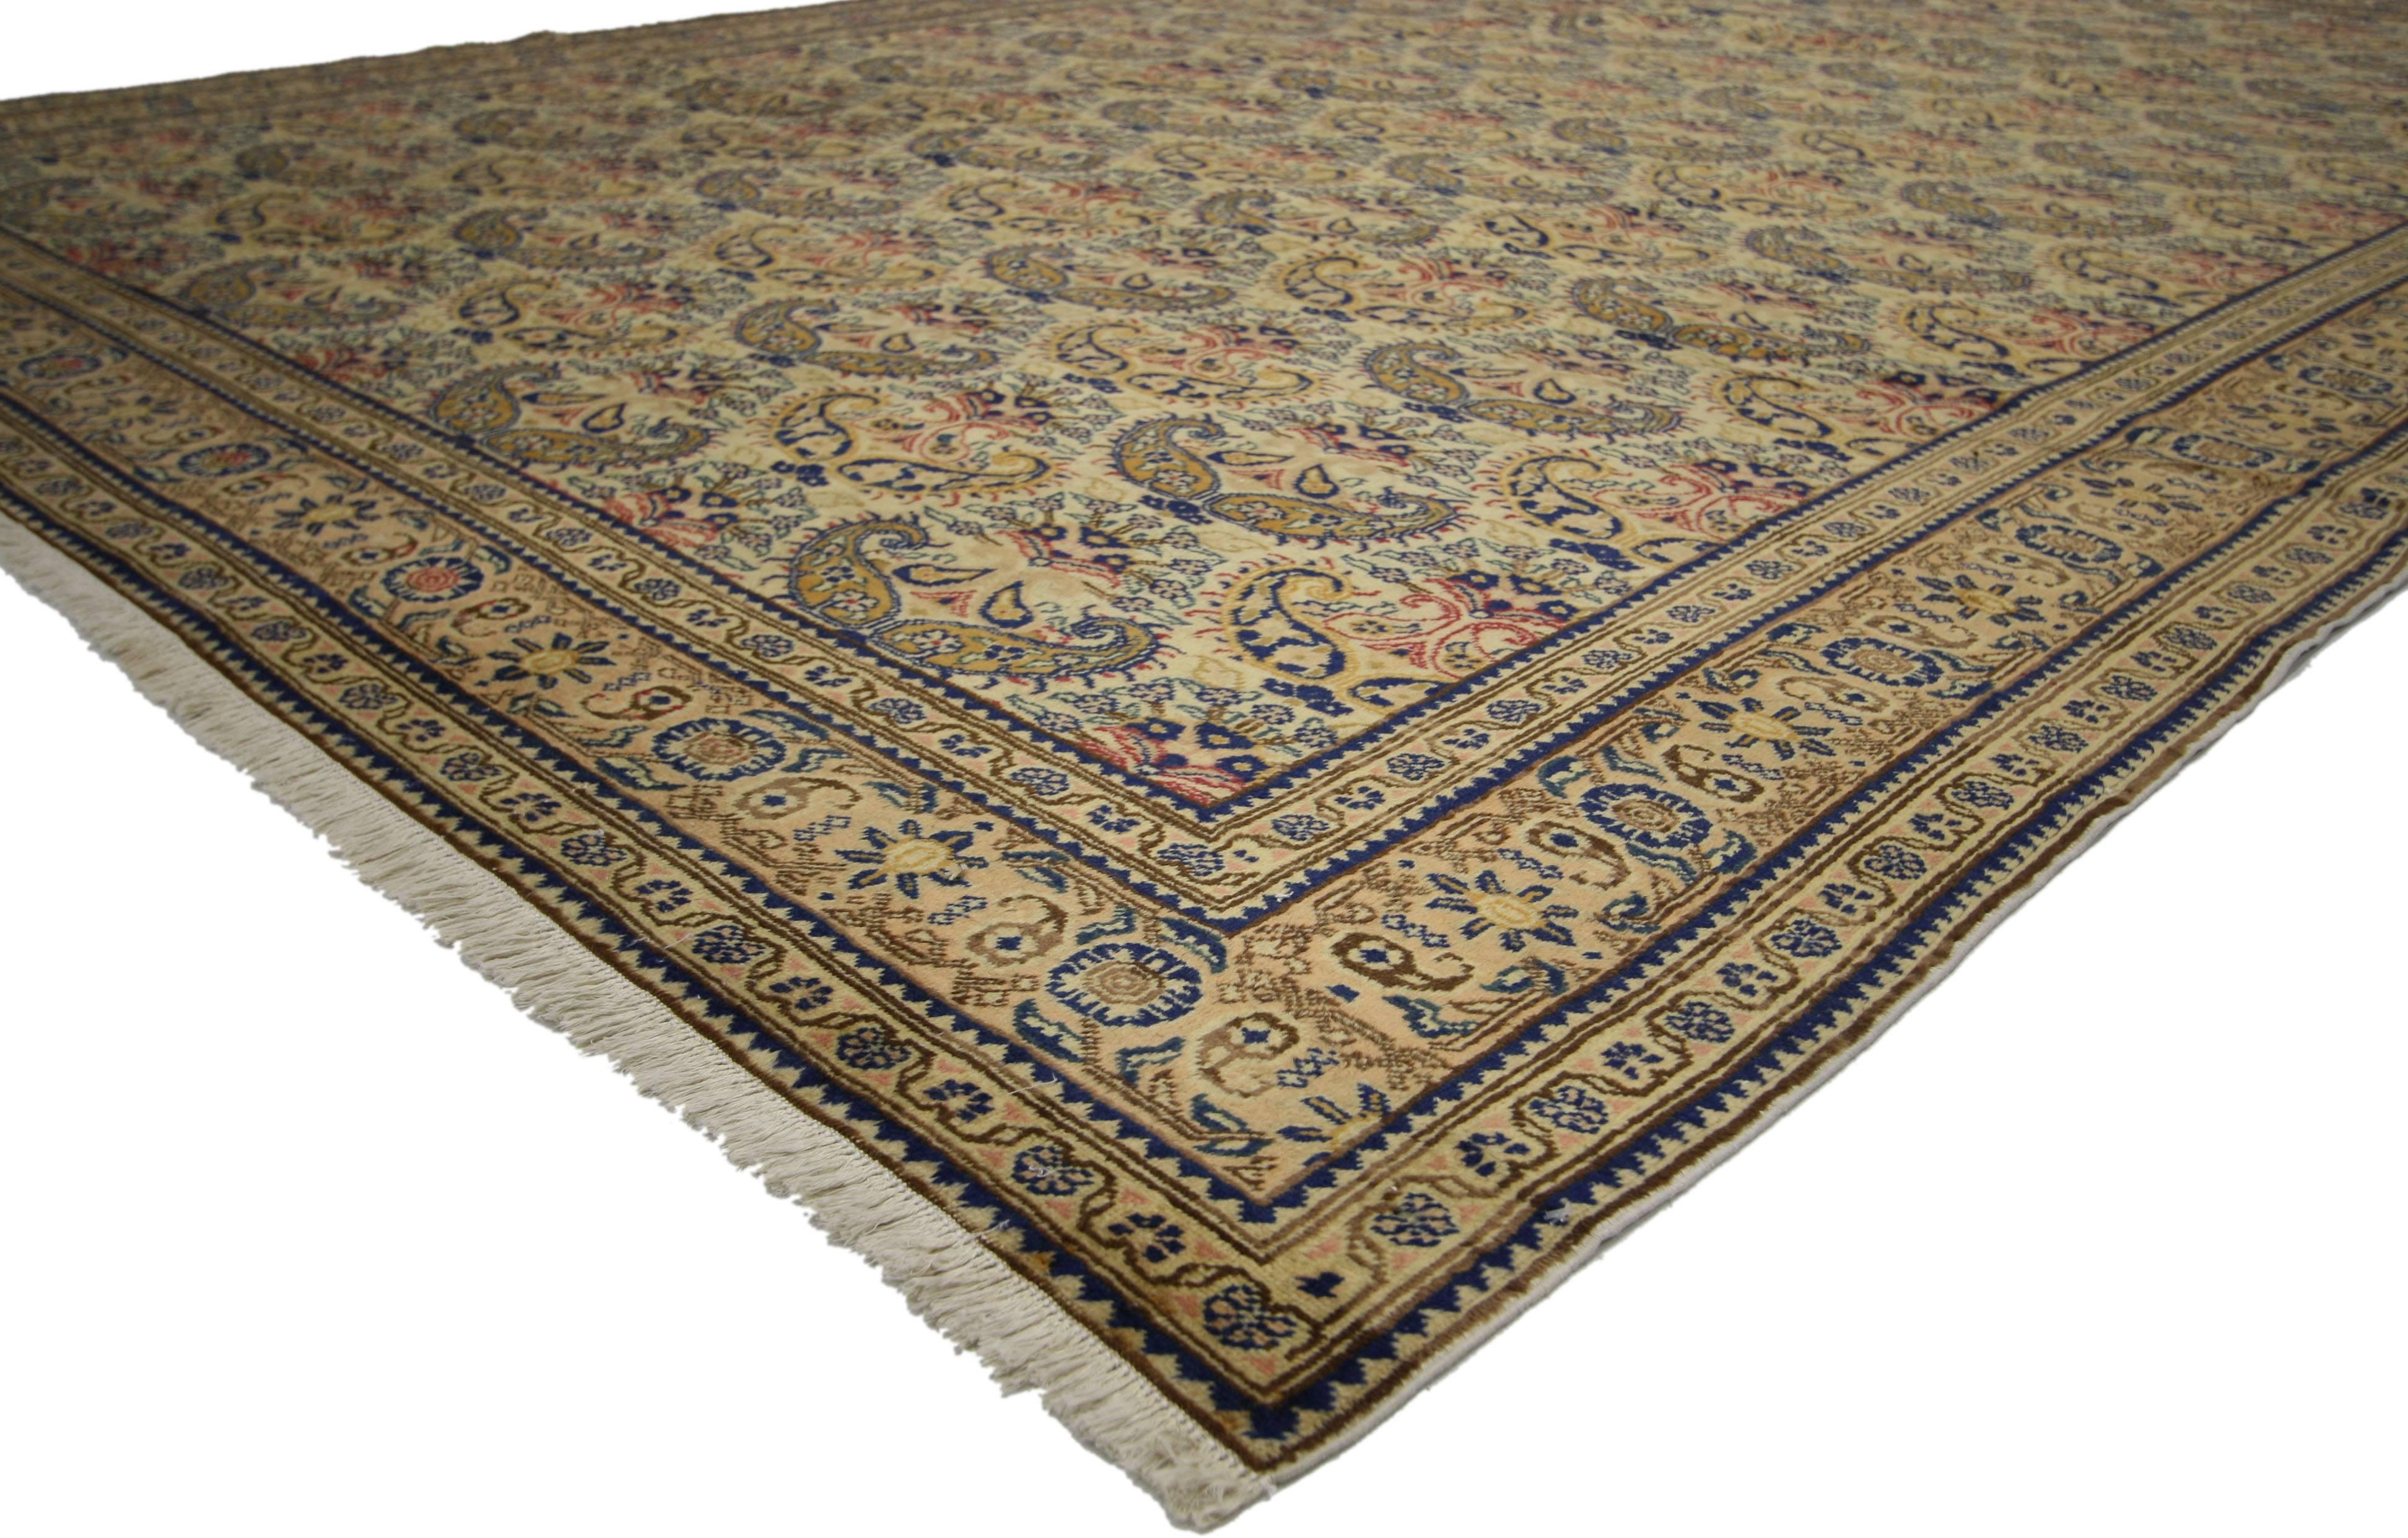 73476, vintage Turkish Sivas rug. This hand knotted wool vintage Turkish Sivas rug displays an all-over repetitive paisley pattern of opulent boteh motifs. The widely used boteh motif is thought to symbolize life with its resemblance to a number of